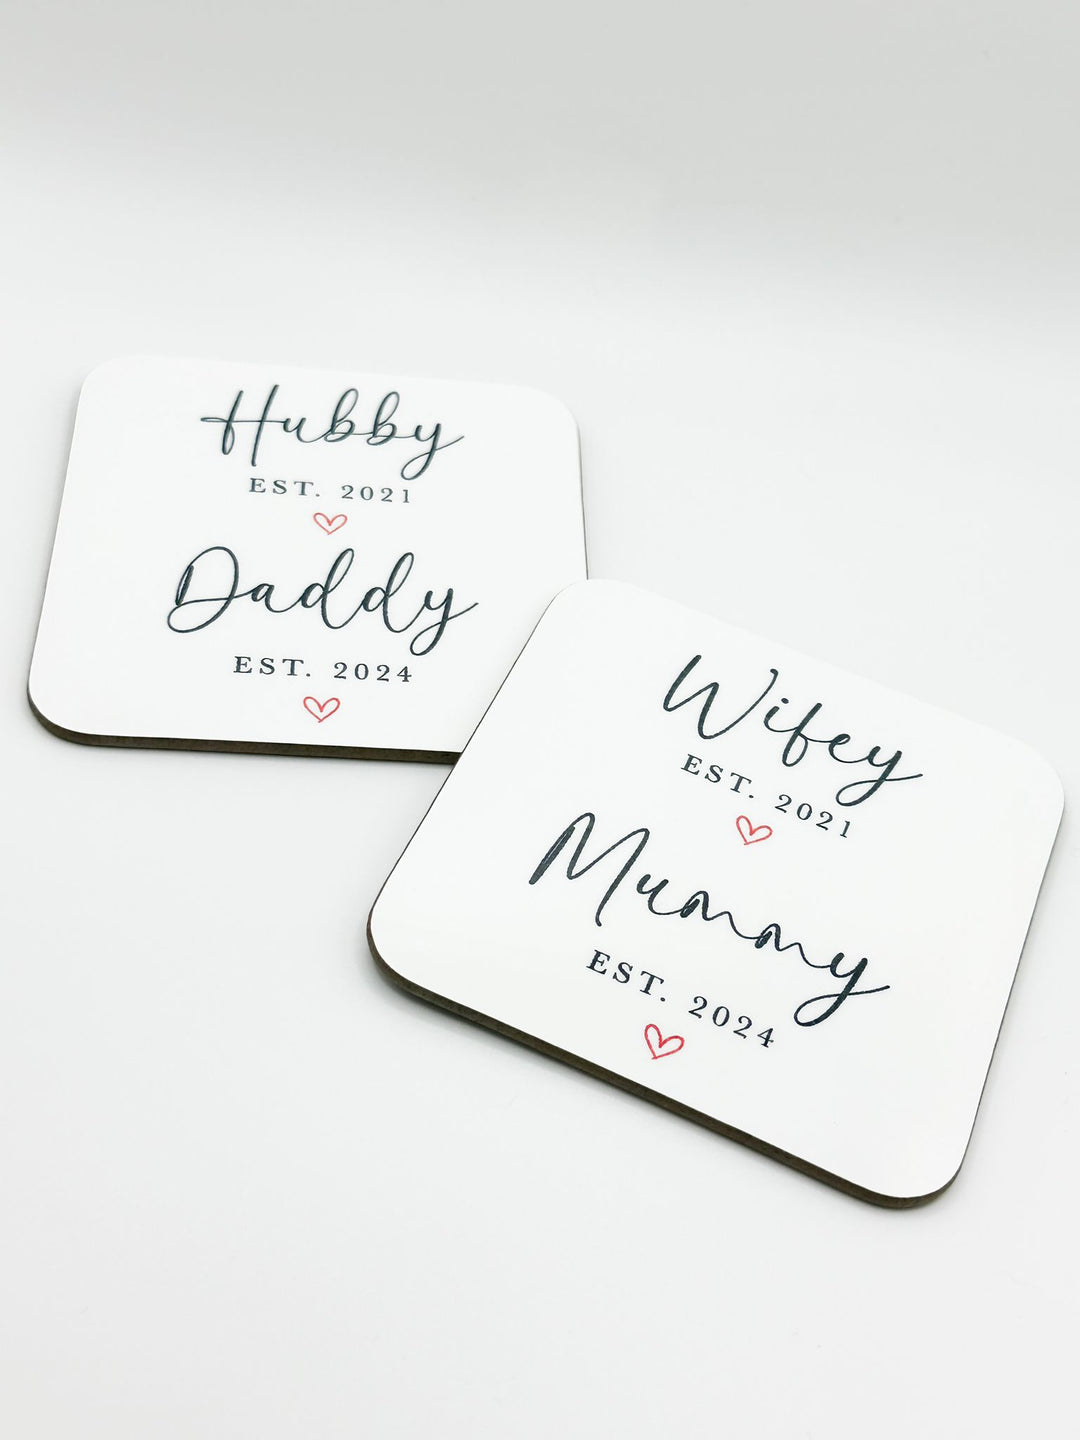 Coasters/Placemats